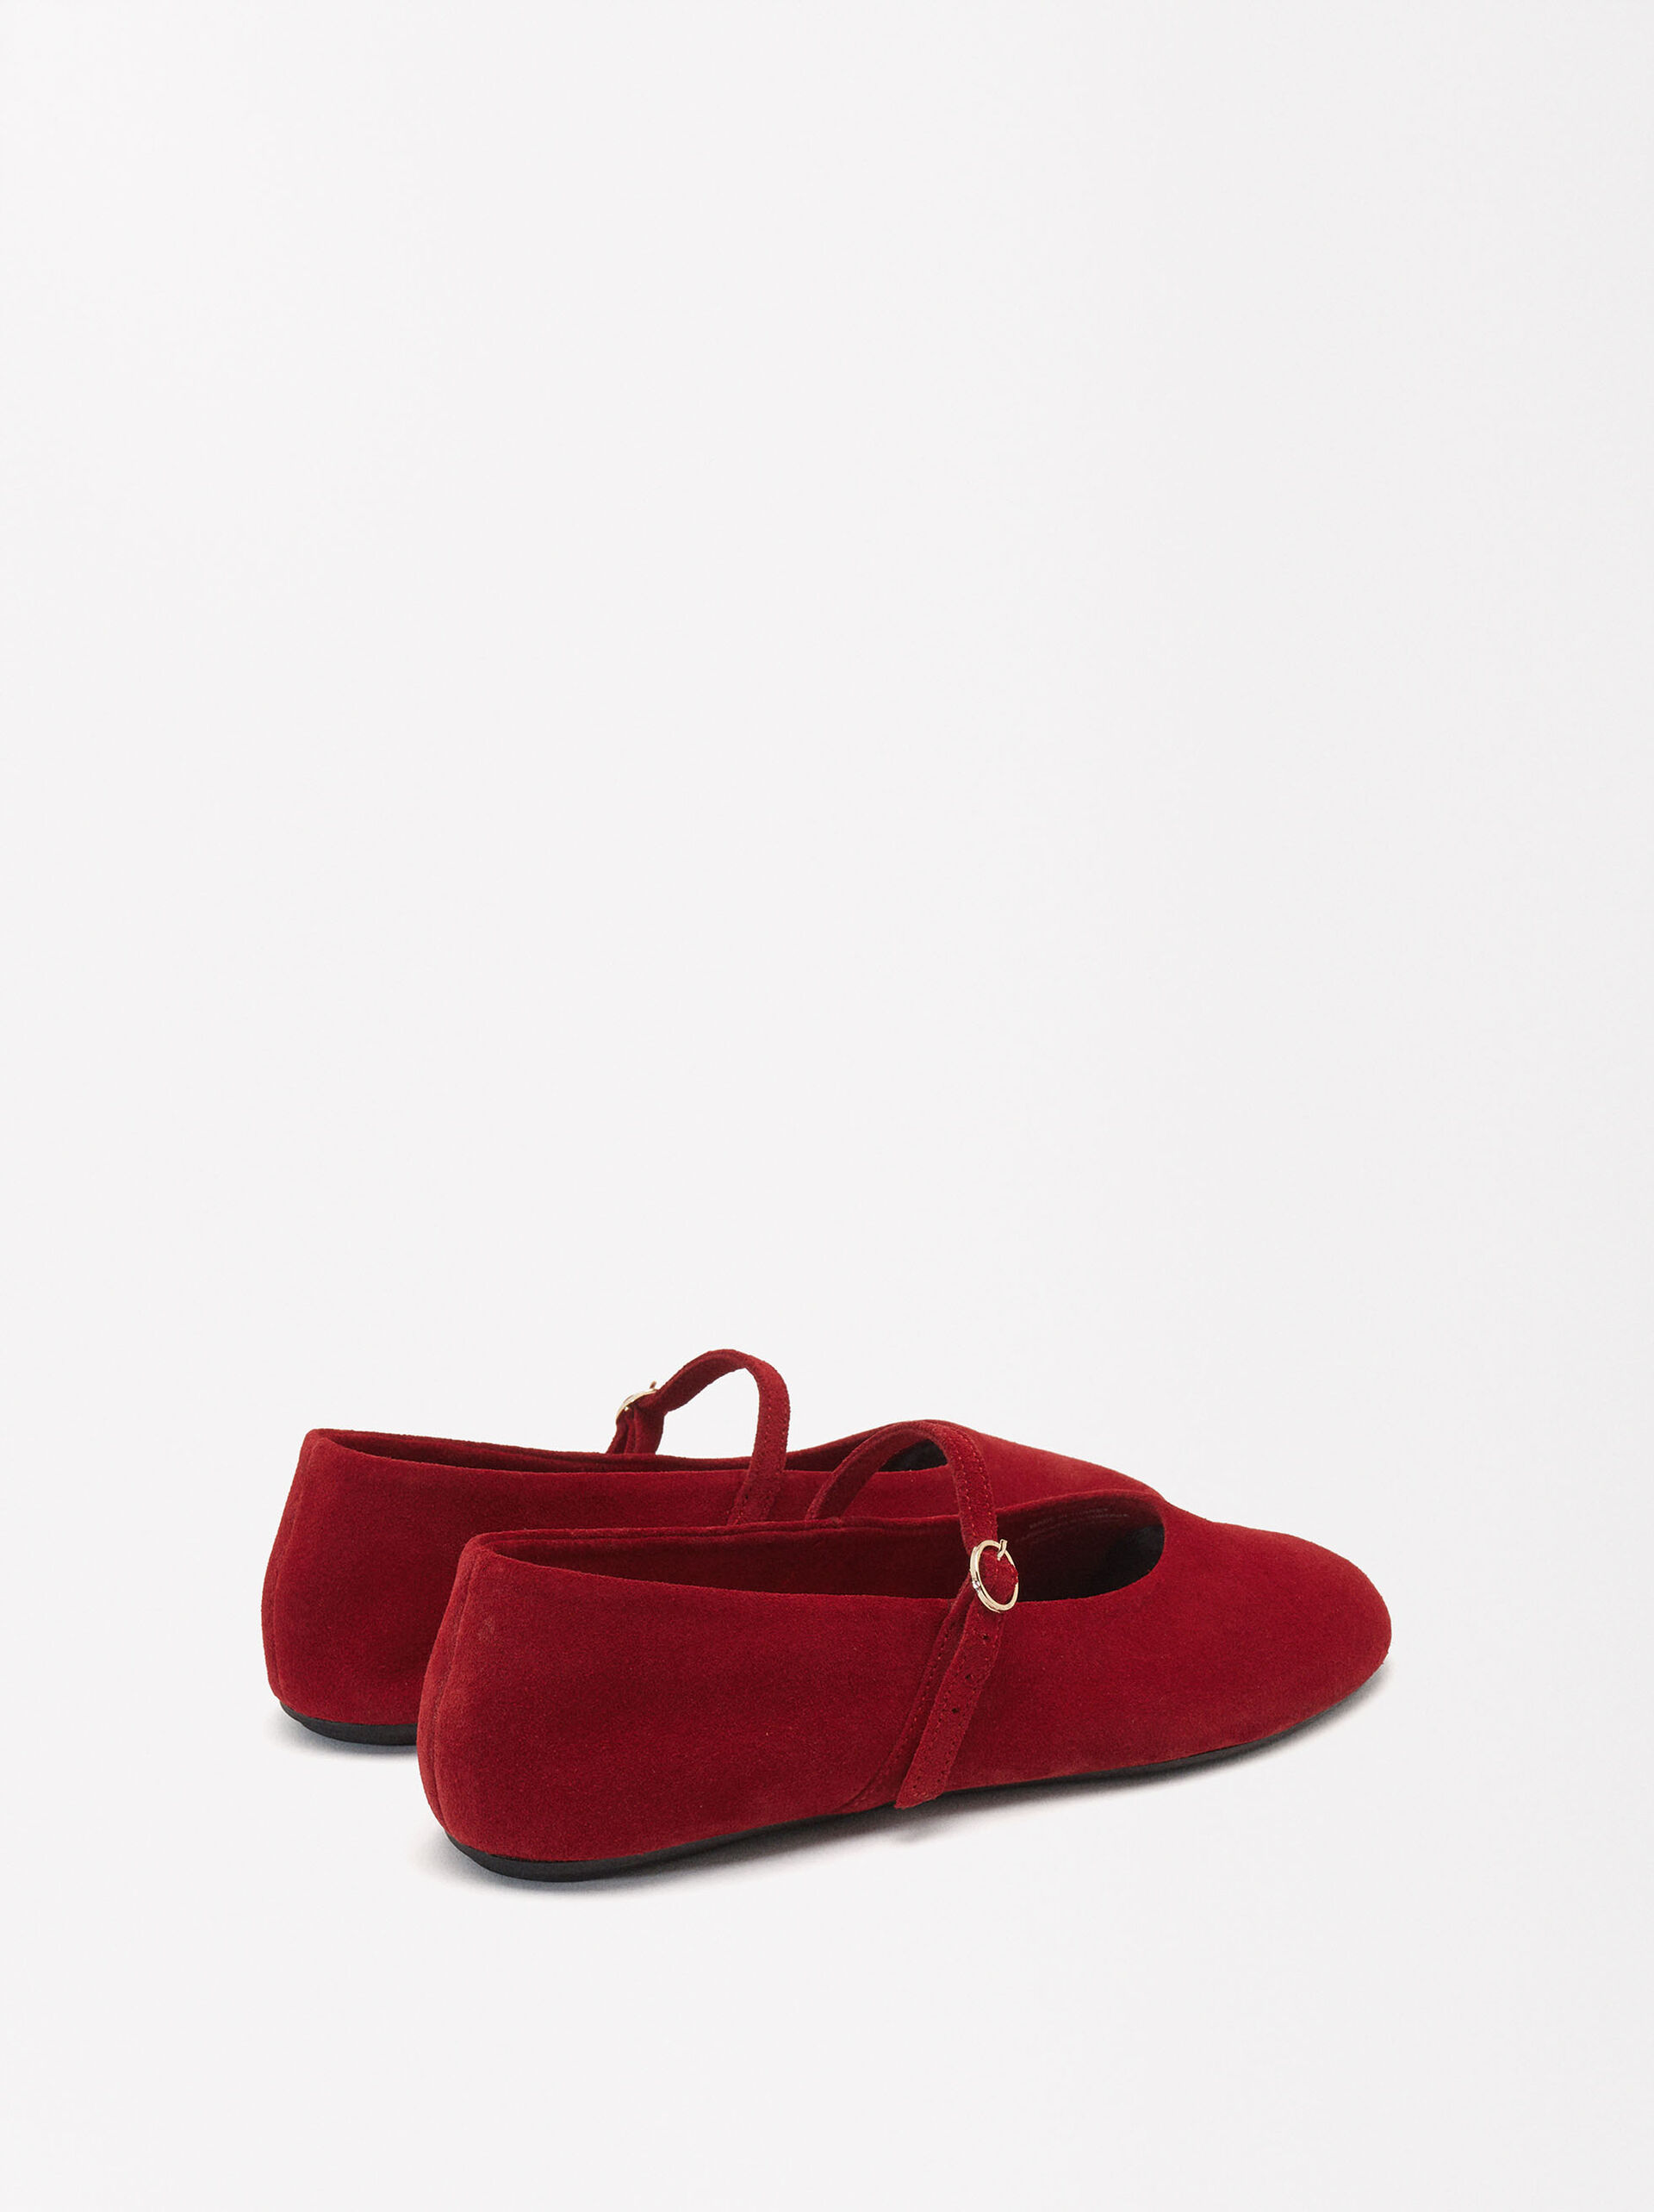 Suede Leather Ballerinas image number 4.0